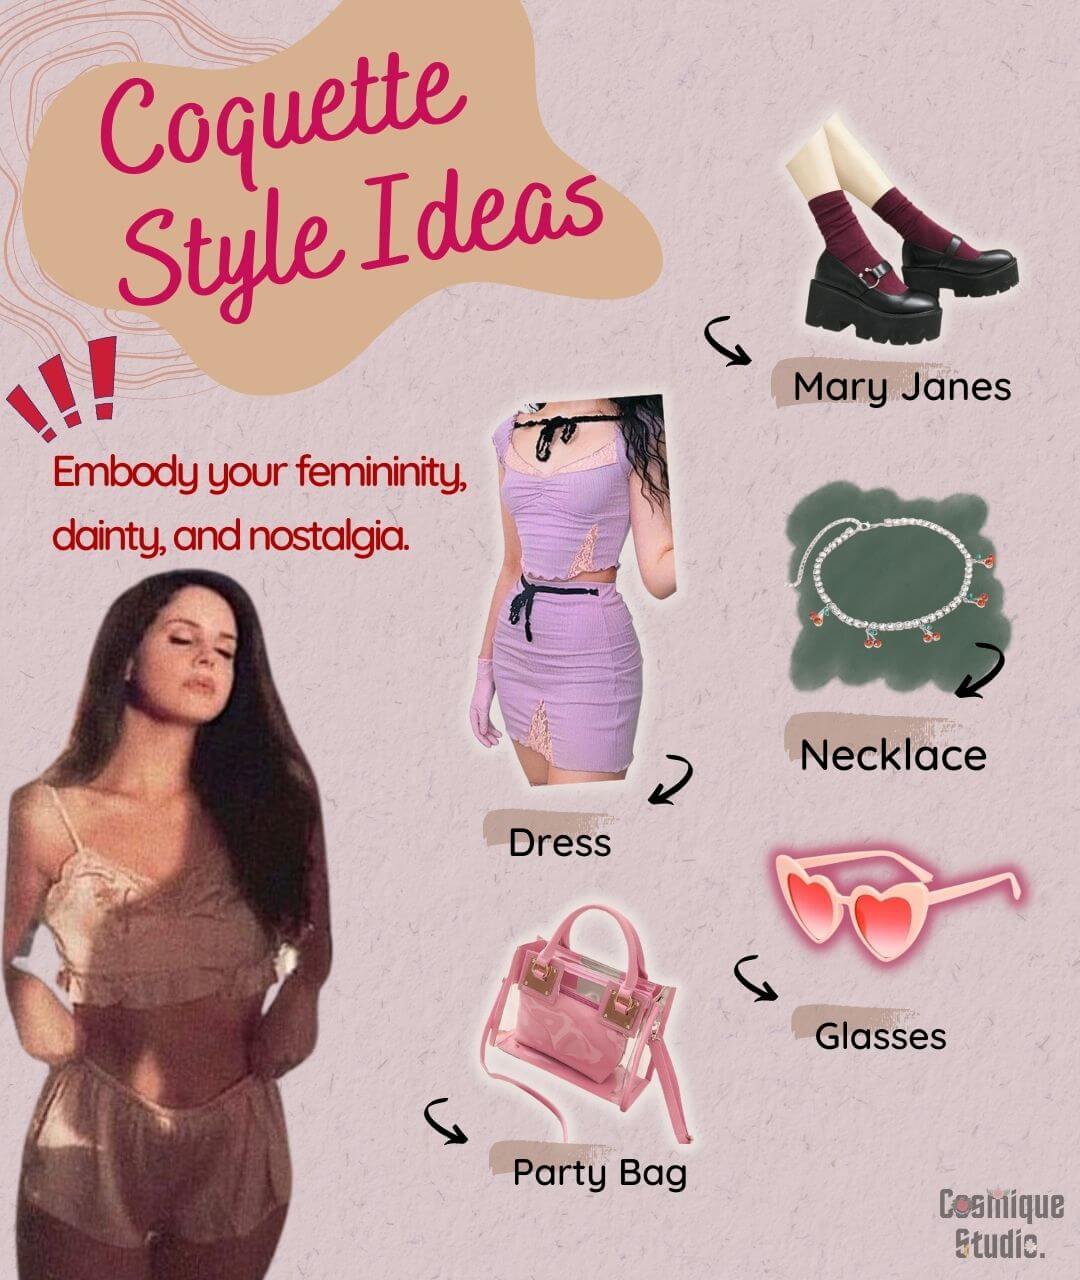 Coquette style tips for girls including five key pieces such as glasses, bags, dress, necklace, and Mary Janes